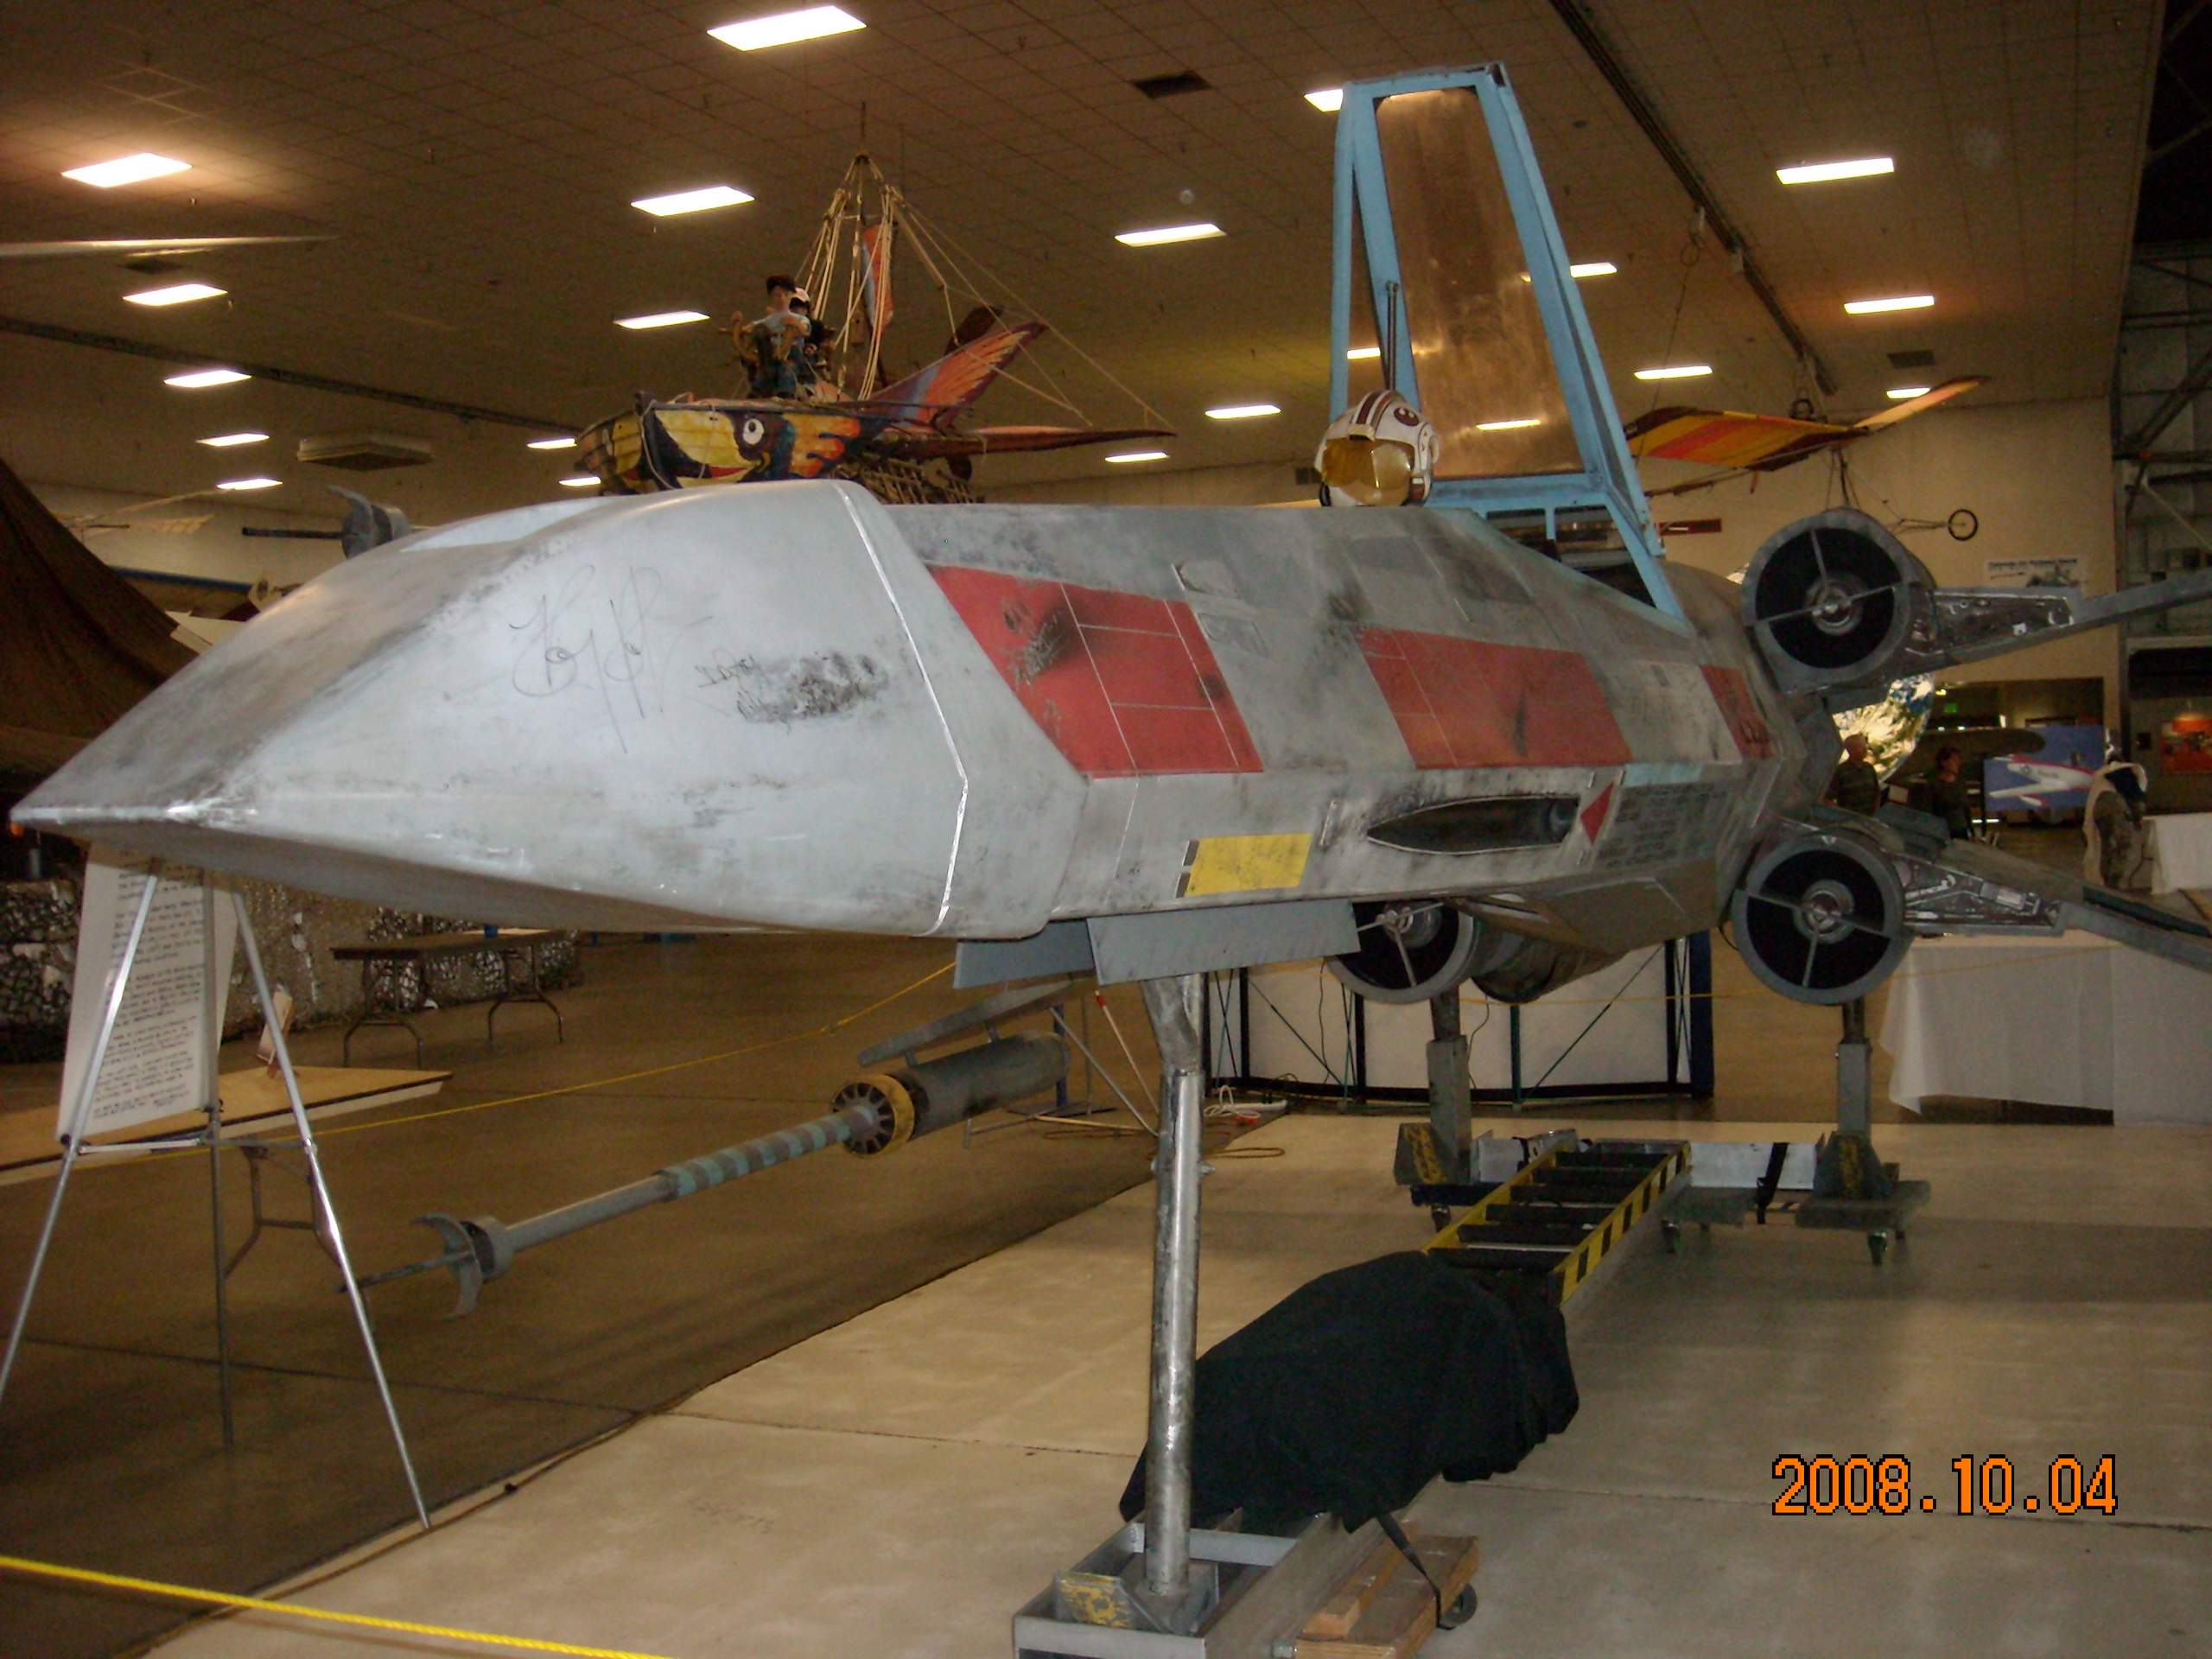  in the Star Wars movies. There were aluminum-clad bombers, fighter jets, 